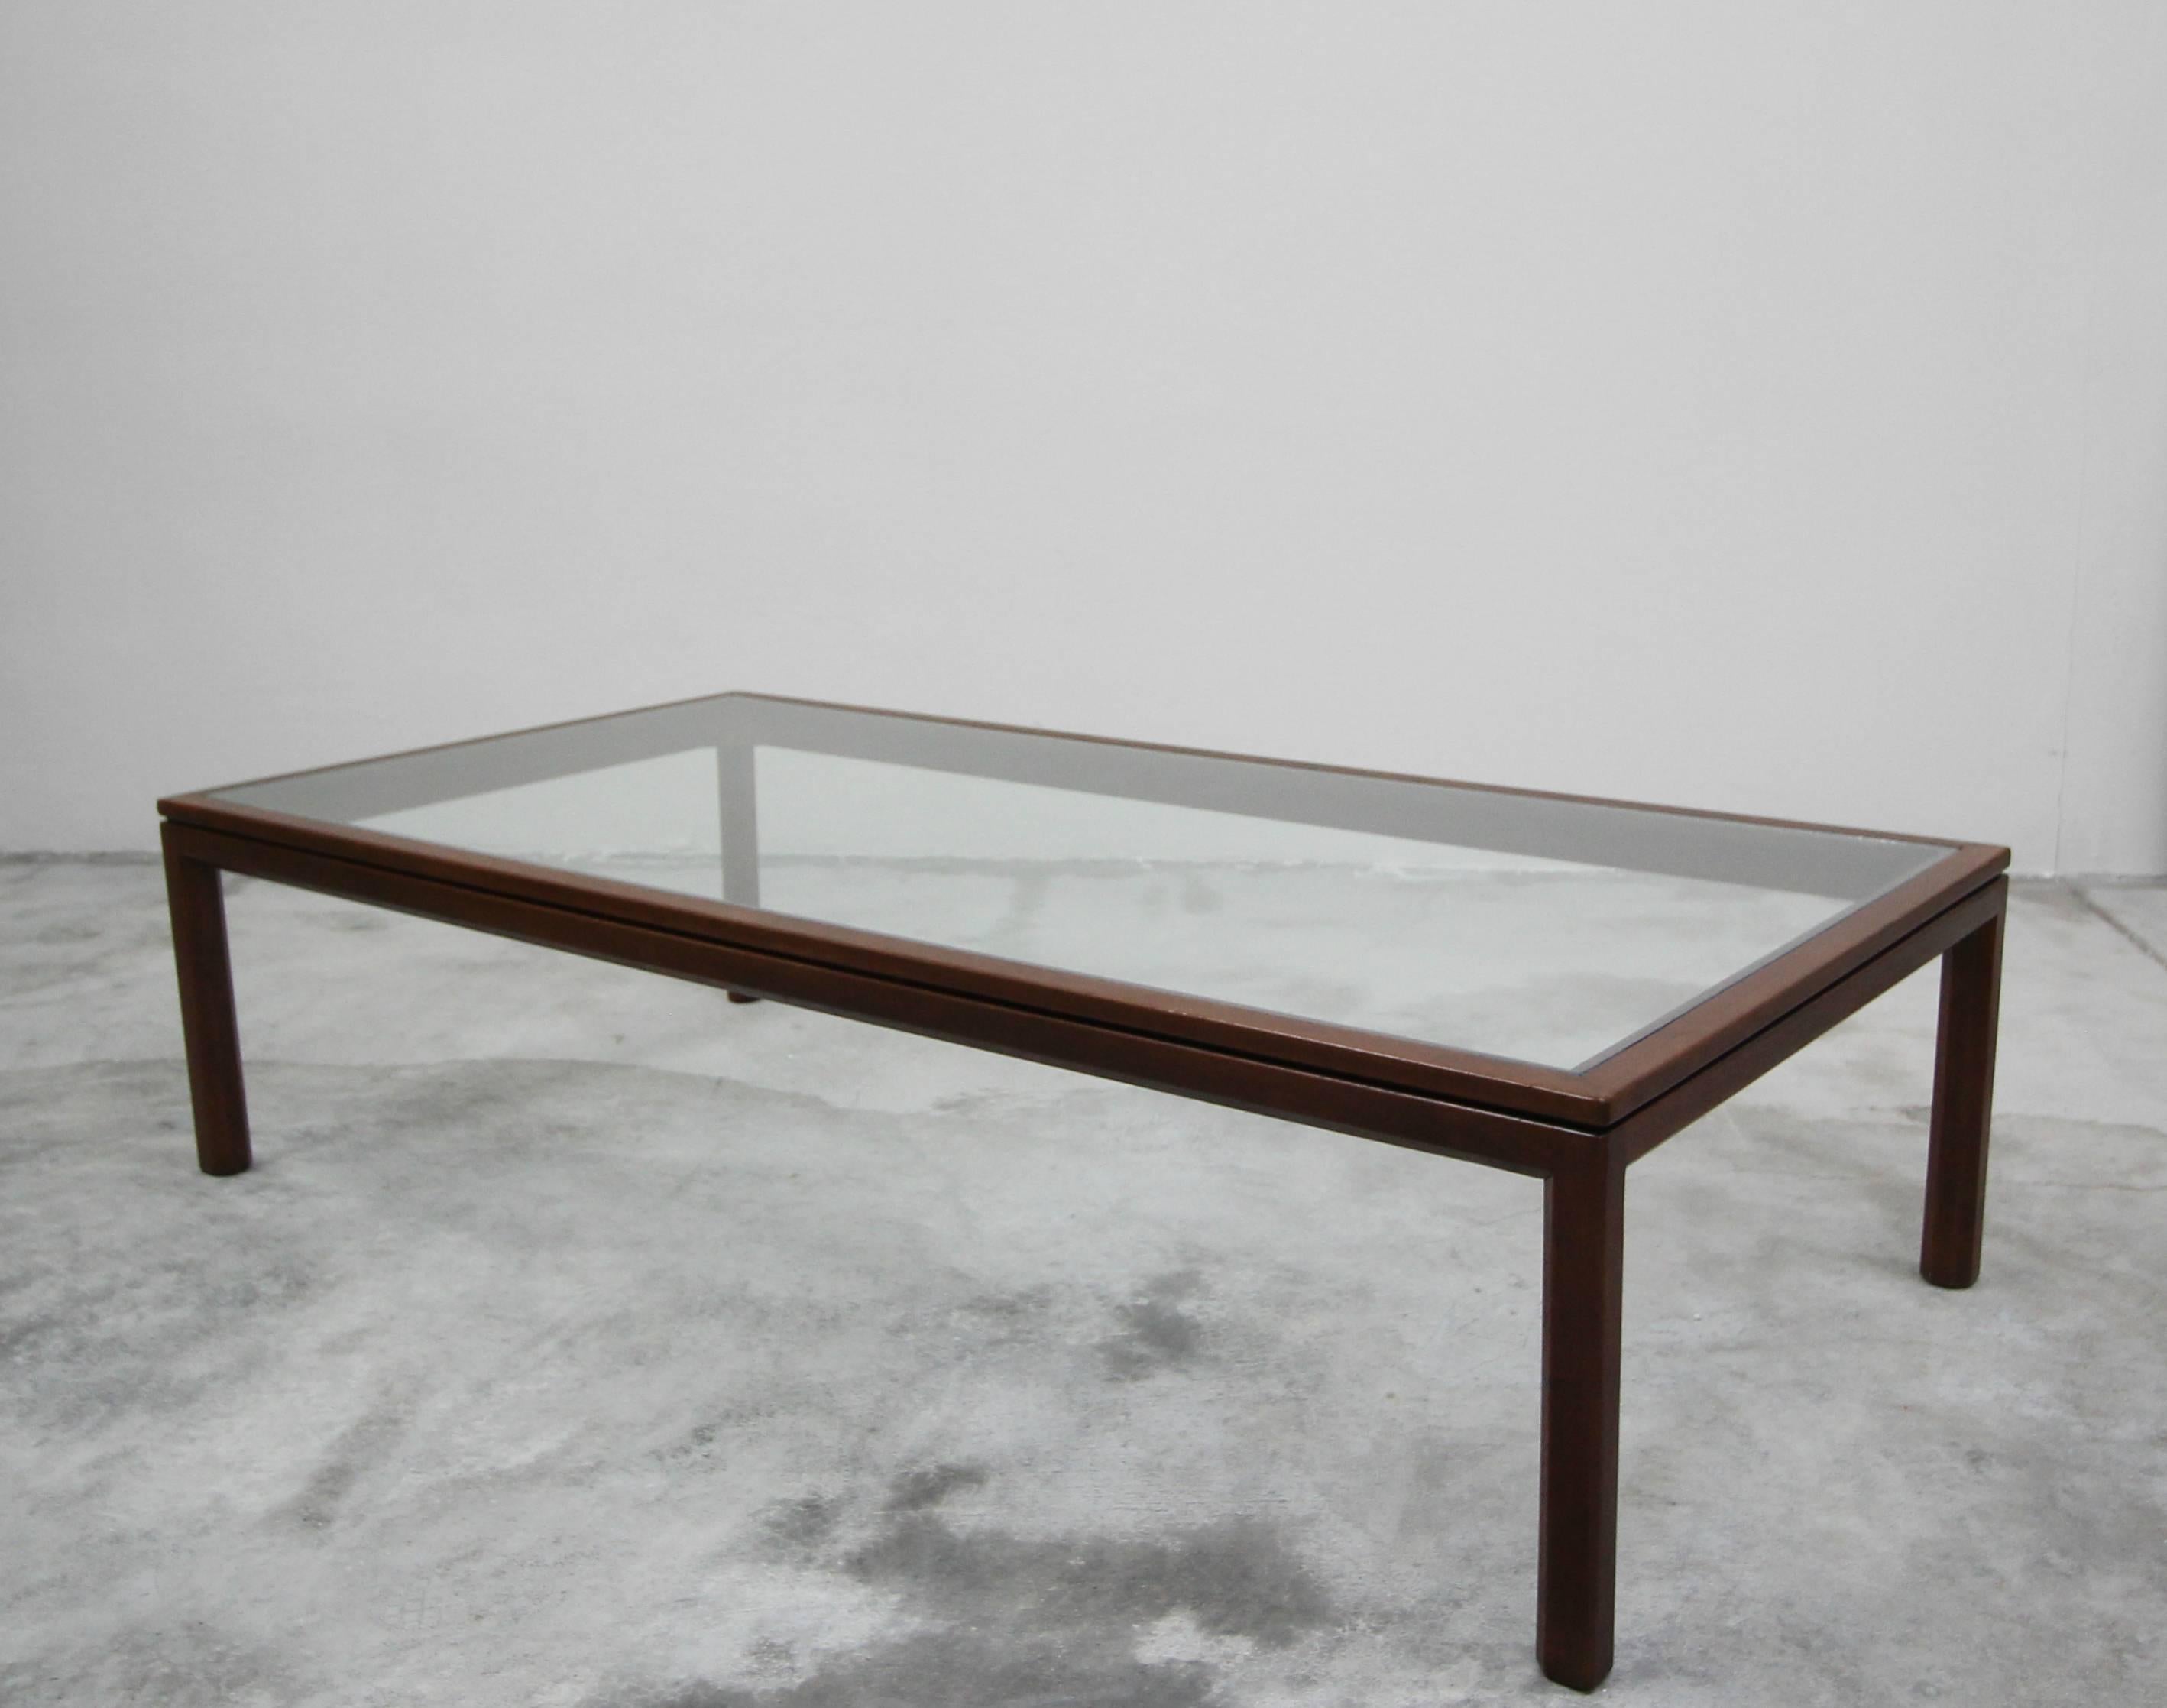 Simple. Beautiful. The perfect Minimalist coffee table constructed of solid walnut and glass. Perfect in any space.

Glass is brand new and the wood is in excellent condition.